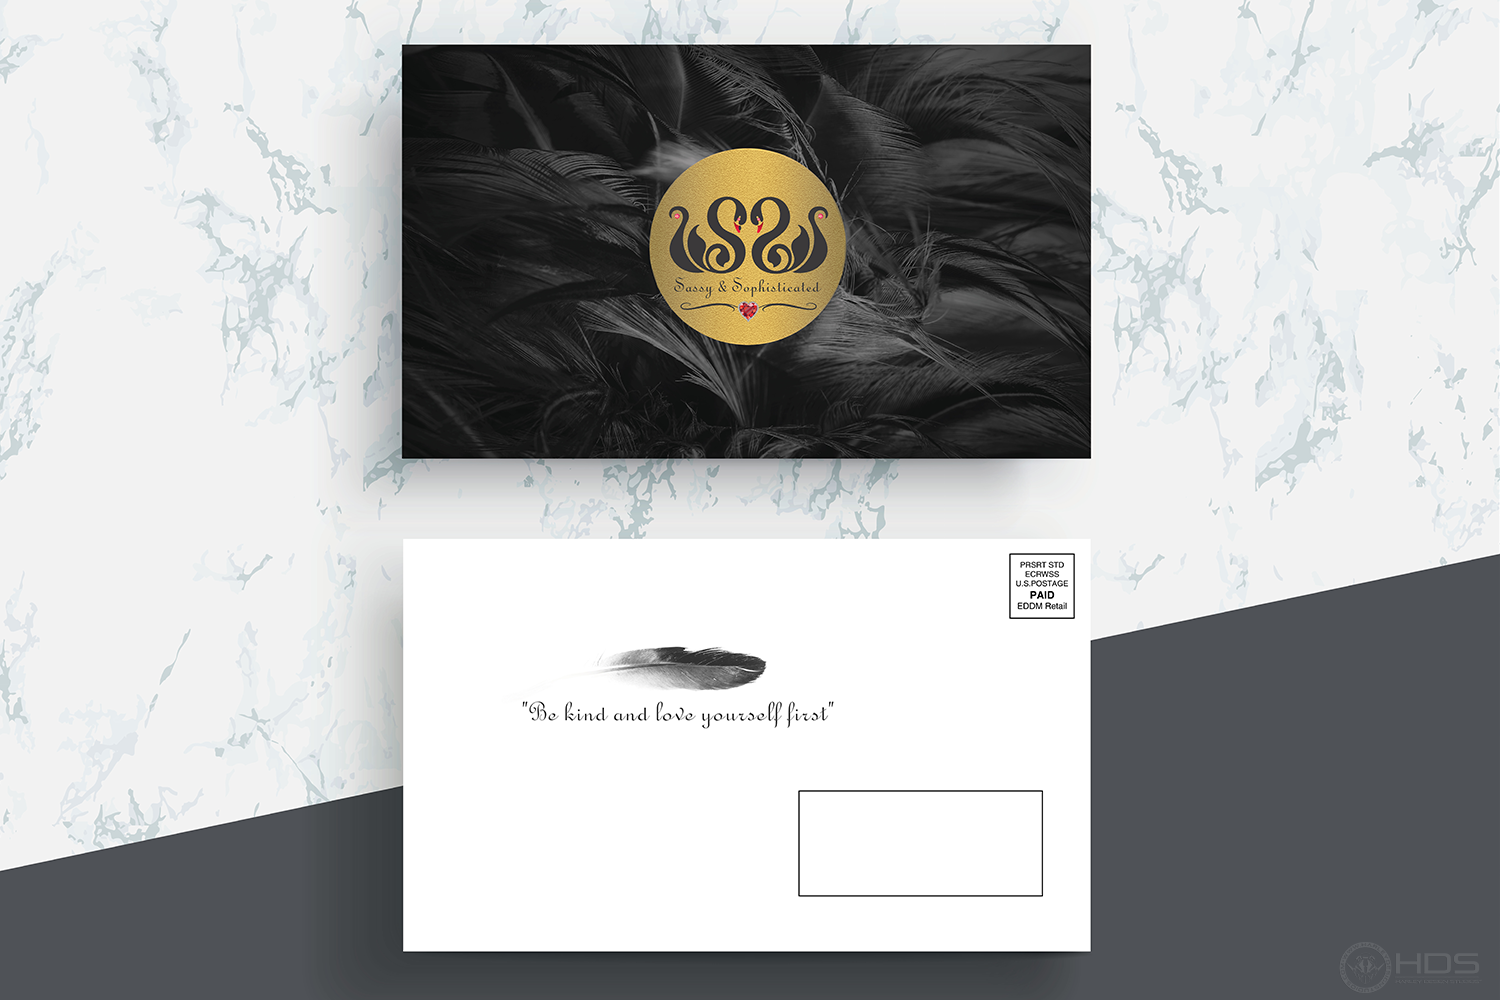 (6x9)-EDDM-INDICIA-POSTCARD_Sassy-Sophisticated-Jewelry_008.png